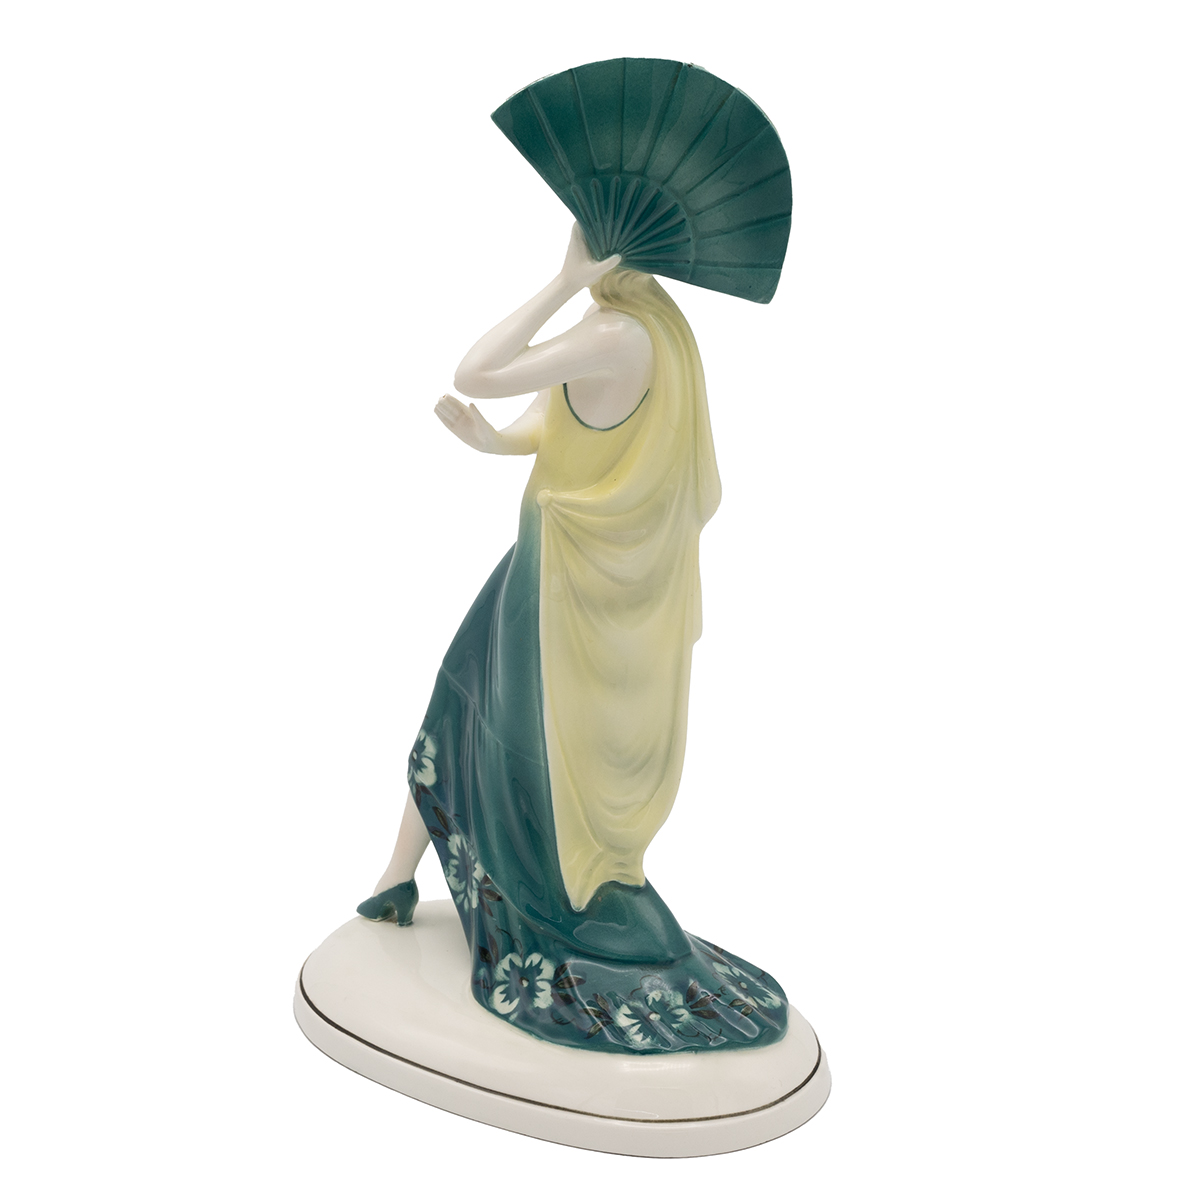 Katzhutte Hertwig & Co porcelain (Thuringia, Germany) - Dancing lady with fan, circa 1920 to 1930... - Image 2 of 3